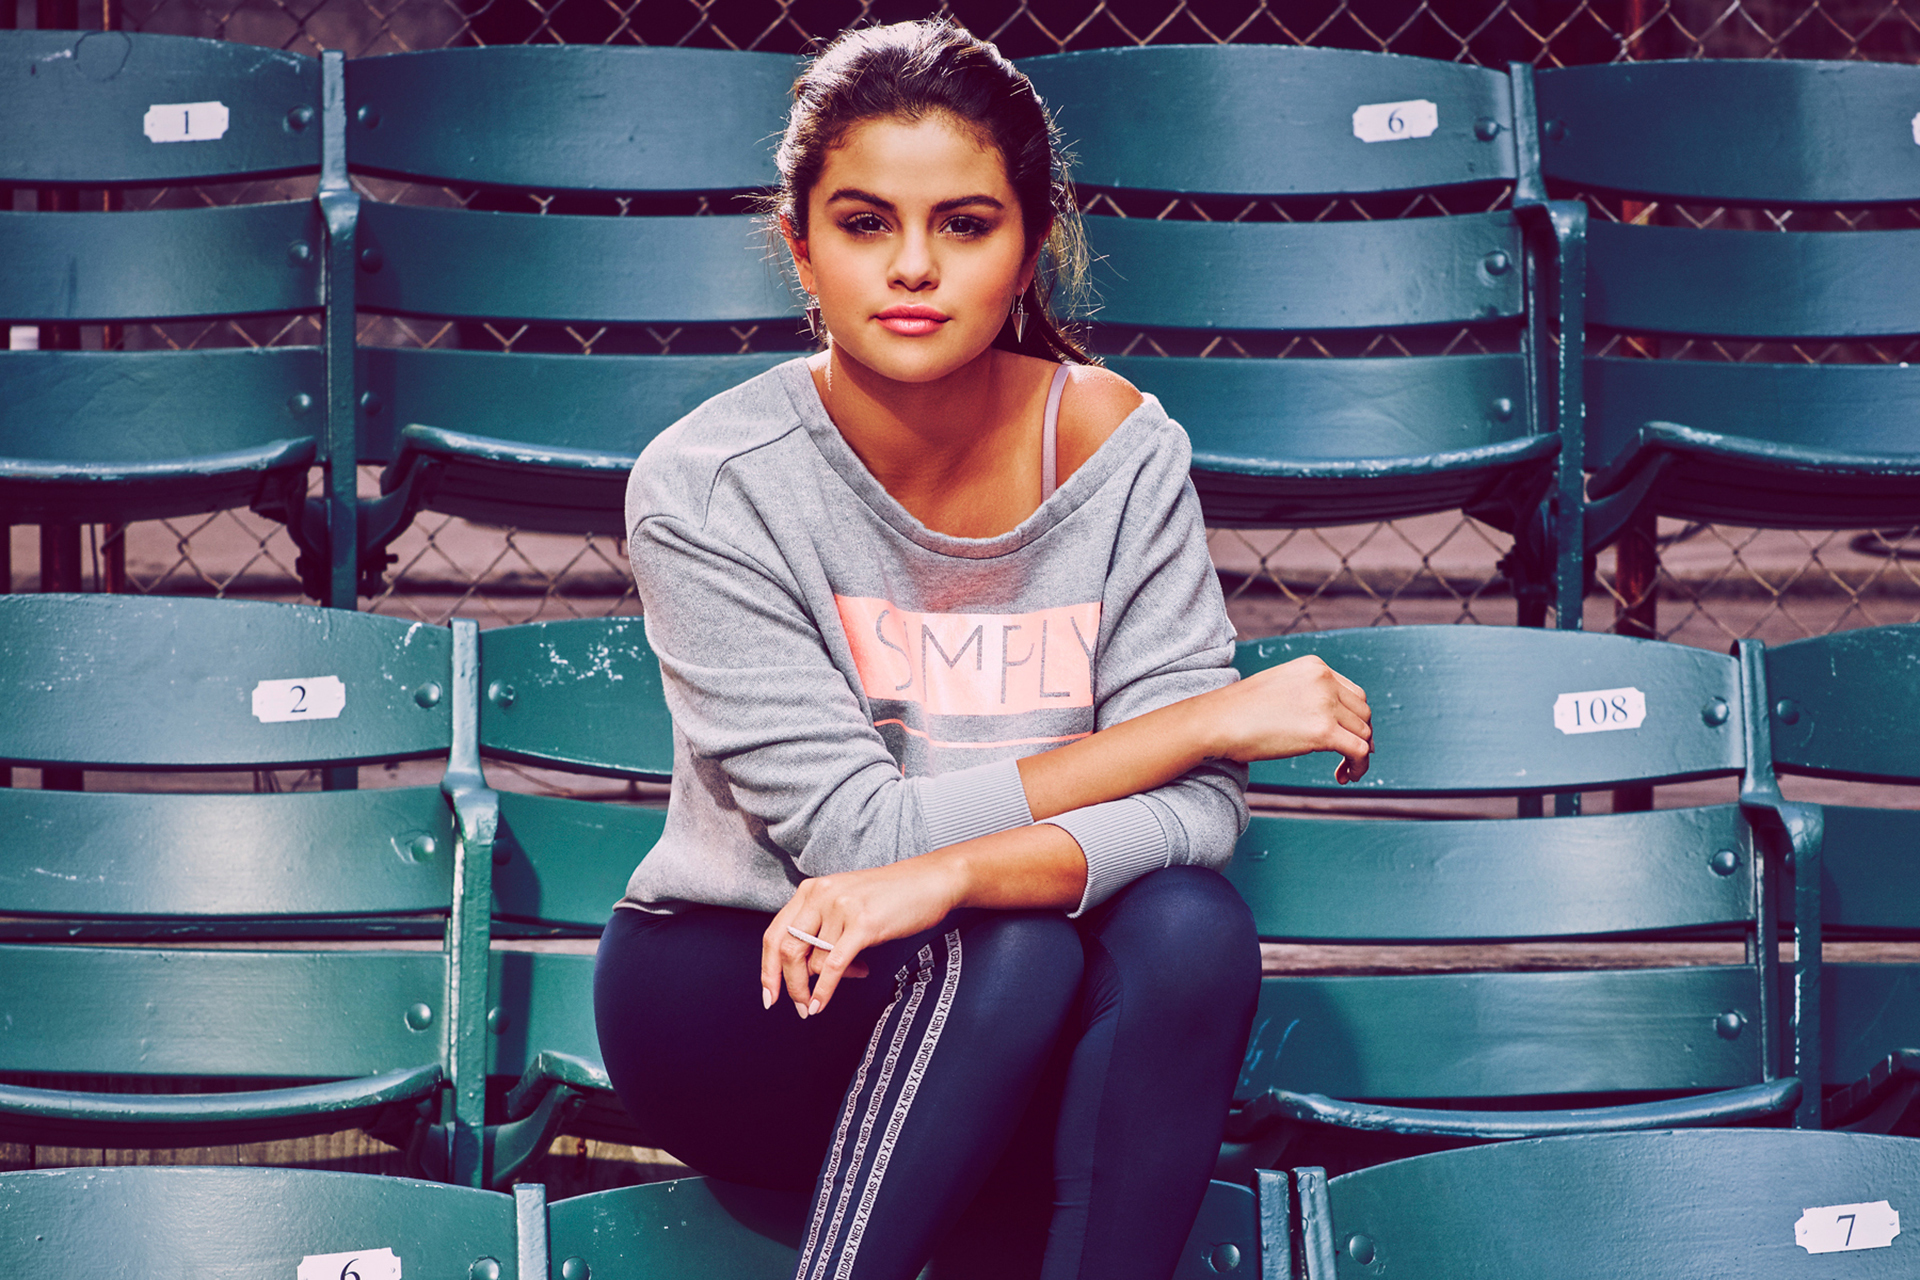 Selena Gomez Women Celebrity Young Woman Looking At Viewer Sitting Women Outdoors Bench Arms Crossed 1920x1280